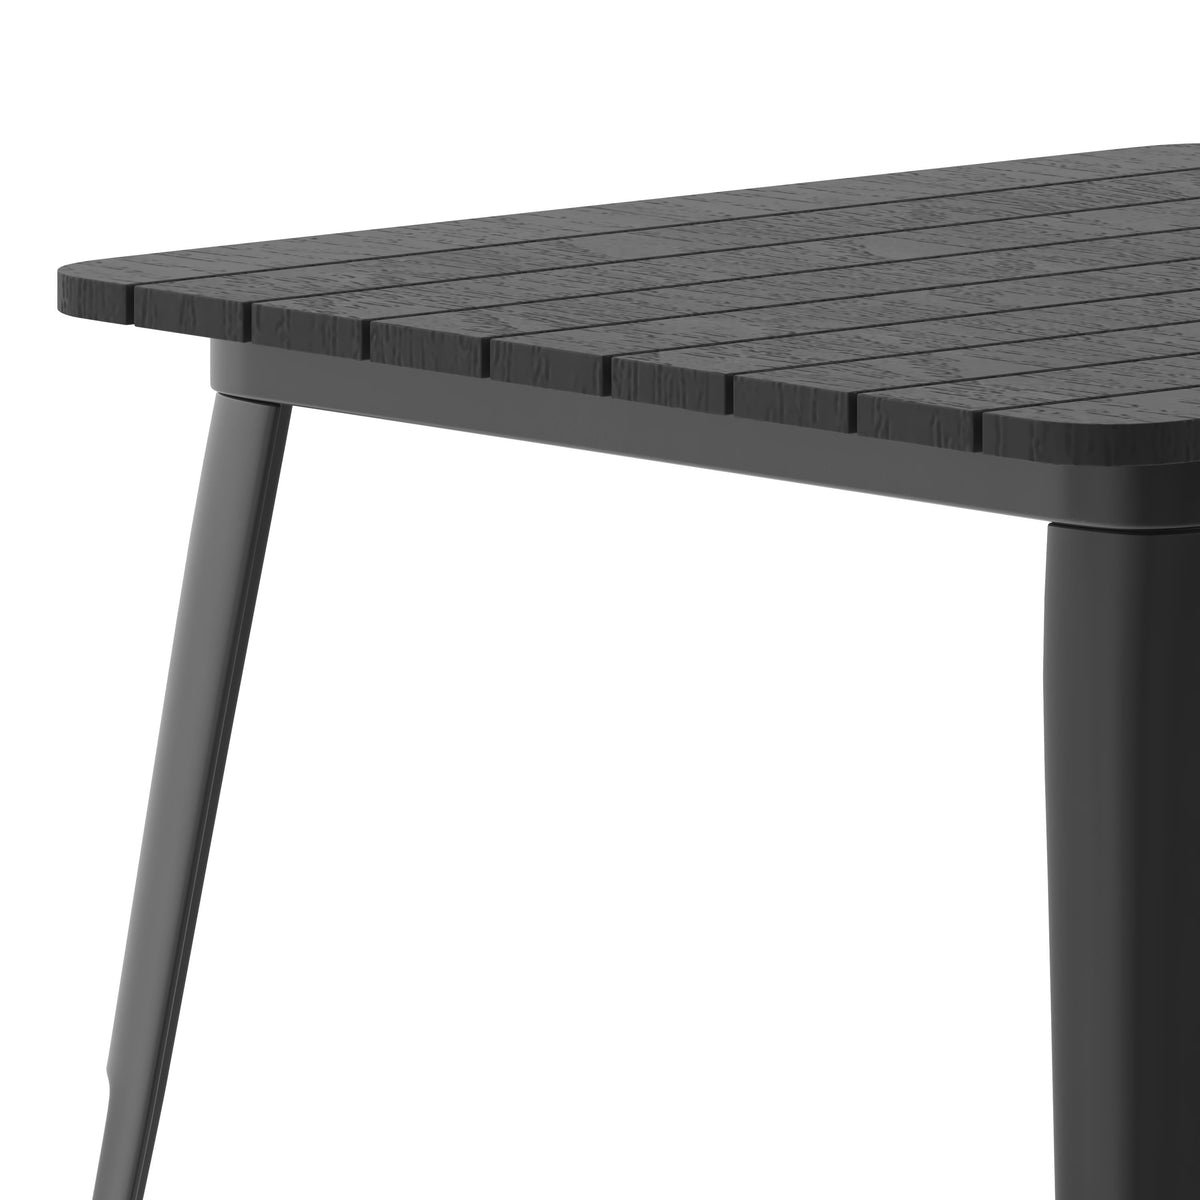 Black |#| 31.5inch SQ Commercial Poly Resin Restaurant Table with Steel Frame-Black/Black